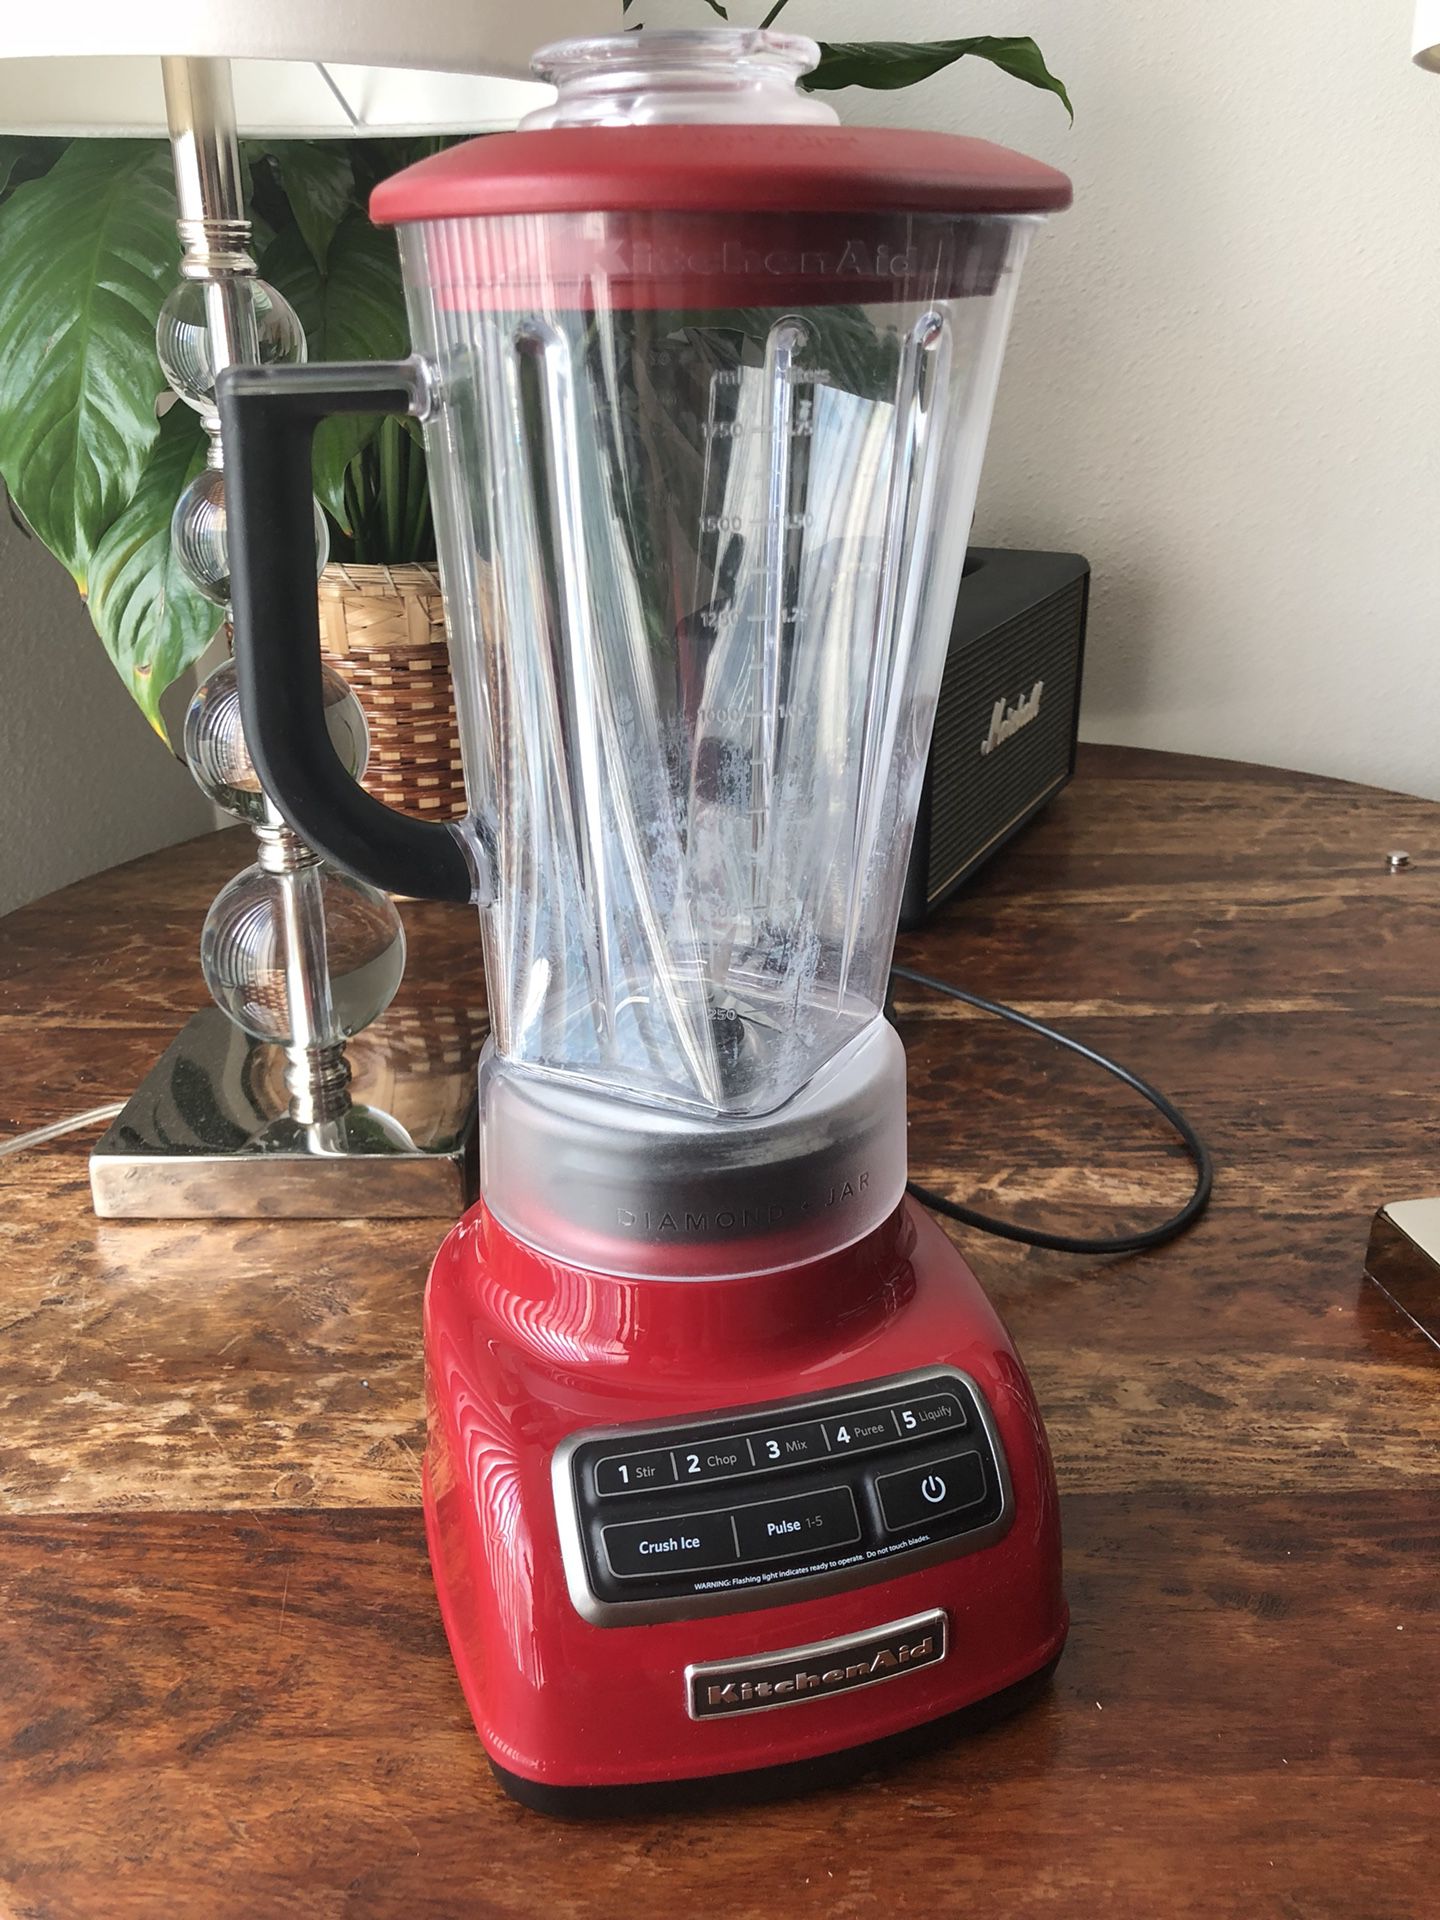 KitchenAid 5-Speed Diamond Blender 60-Ounce BPA-Free Pitcher Empire Red for Sale in TX - OfferUp